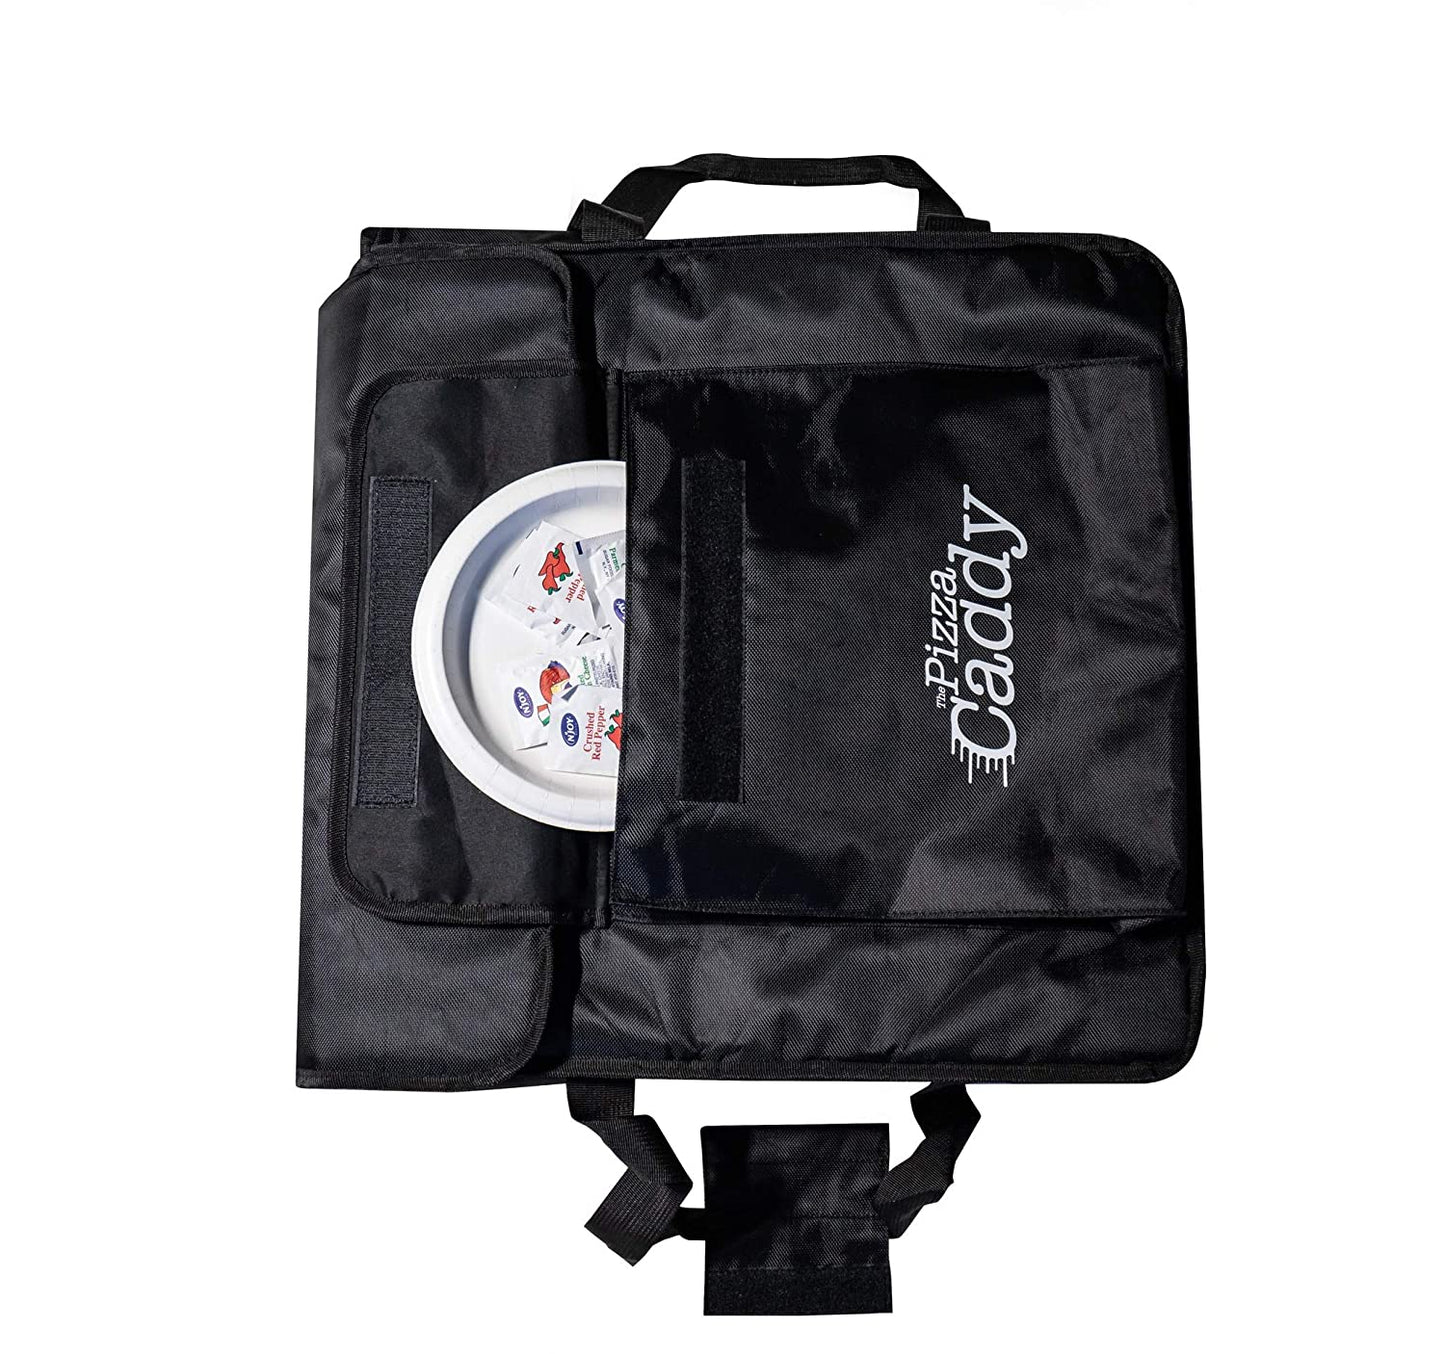 Caddy Mesa - Insulated Pizza Carrier For Takeout and Delivery